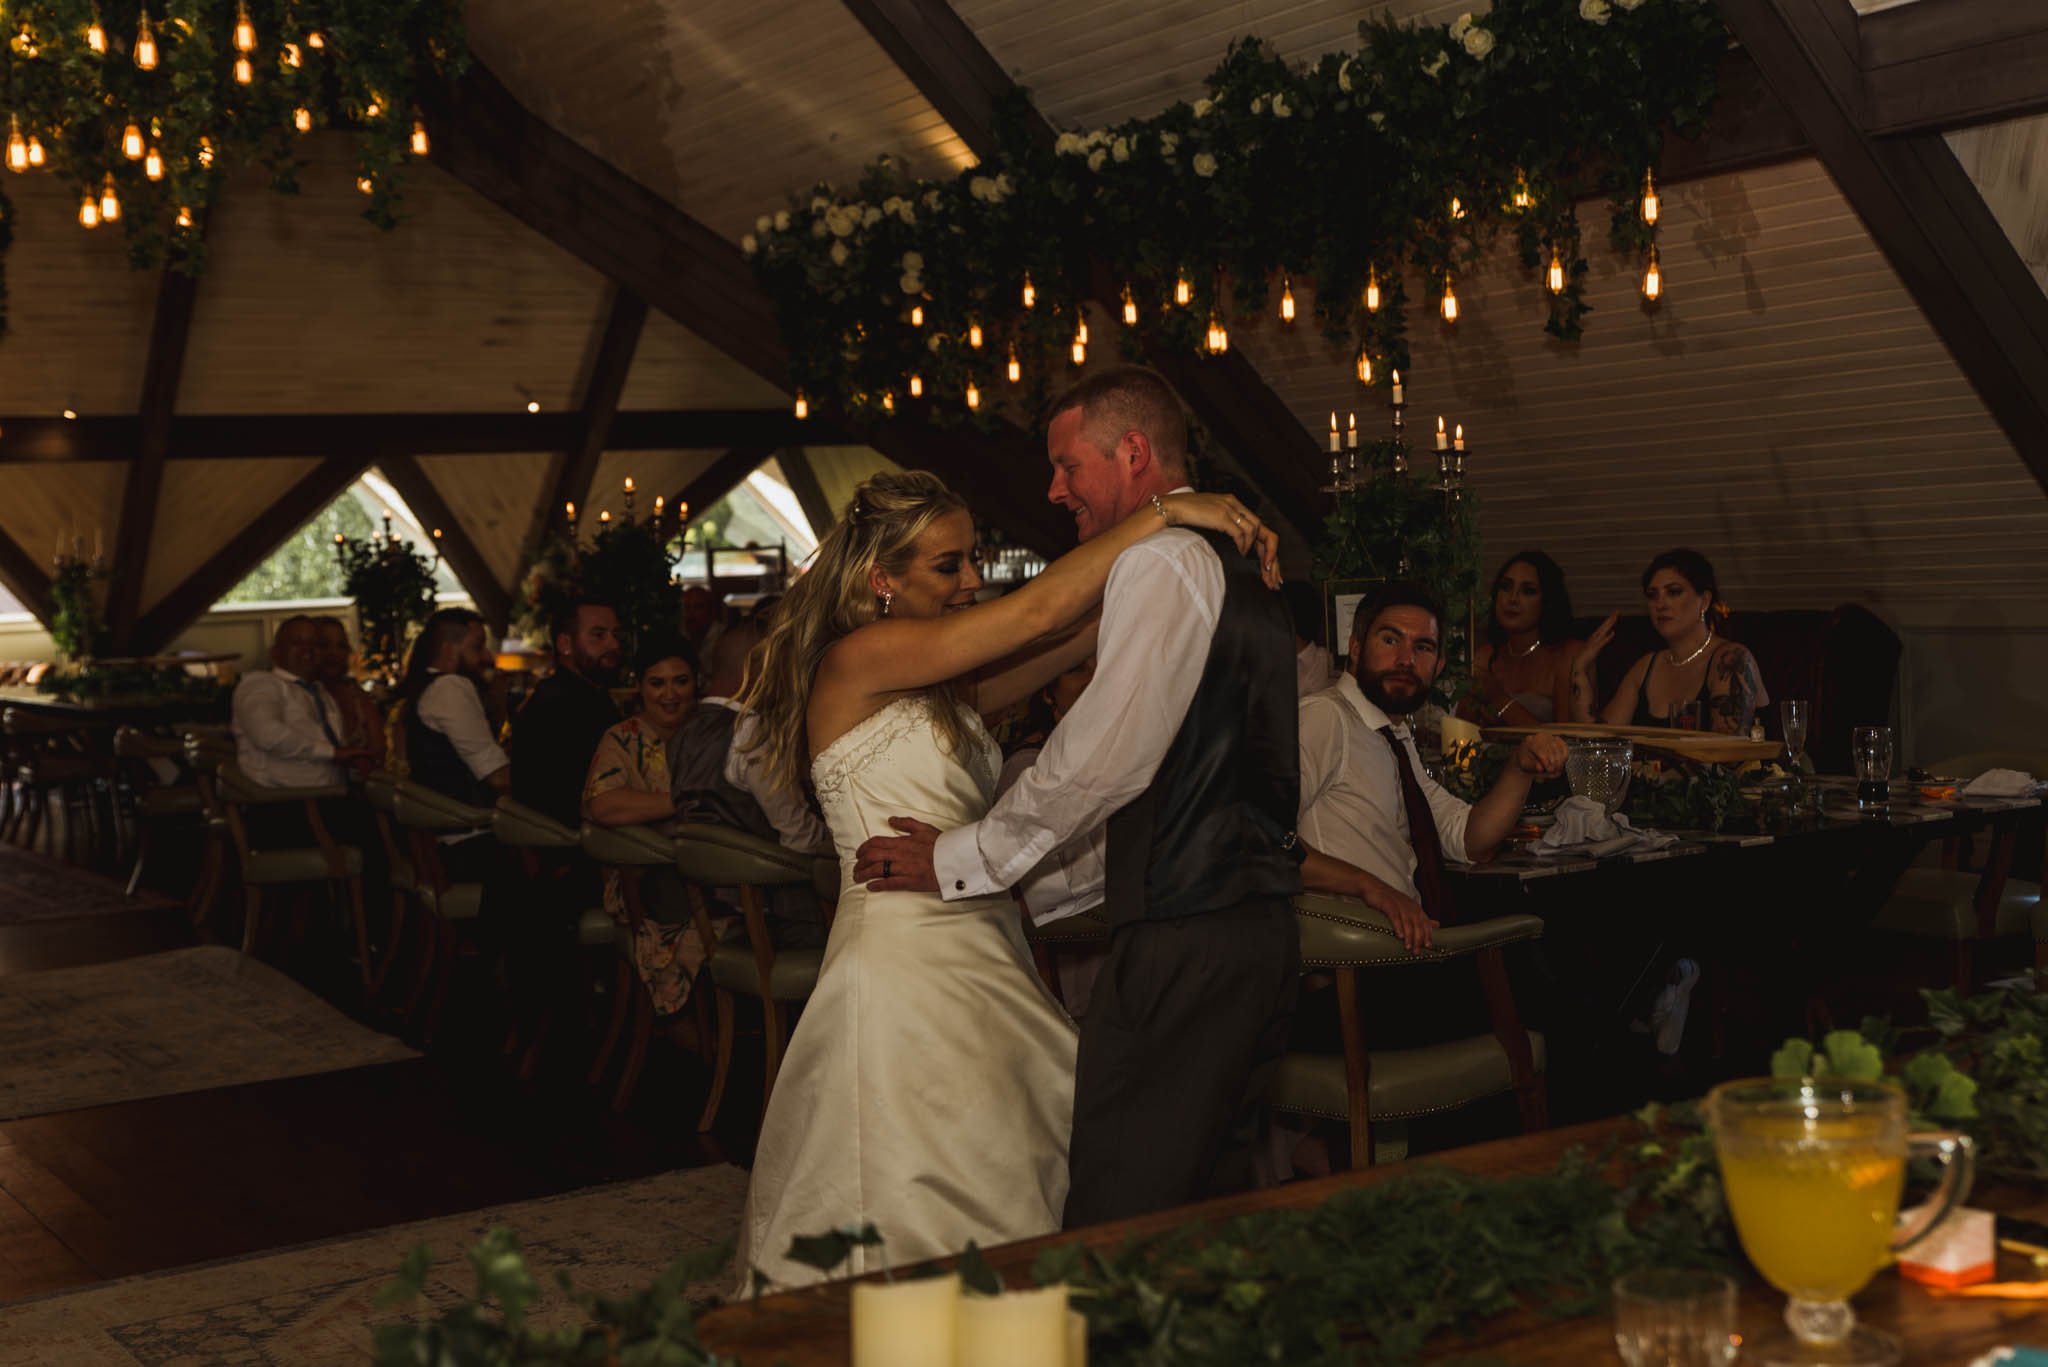  Brdies arms around her husband's shoulders while his hands are on his wife's hips as they slow dance in the dimly lit reception room upstairs with candles and fairy lights giving the room some atmosphere. 